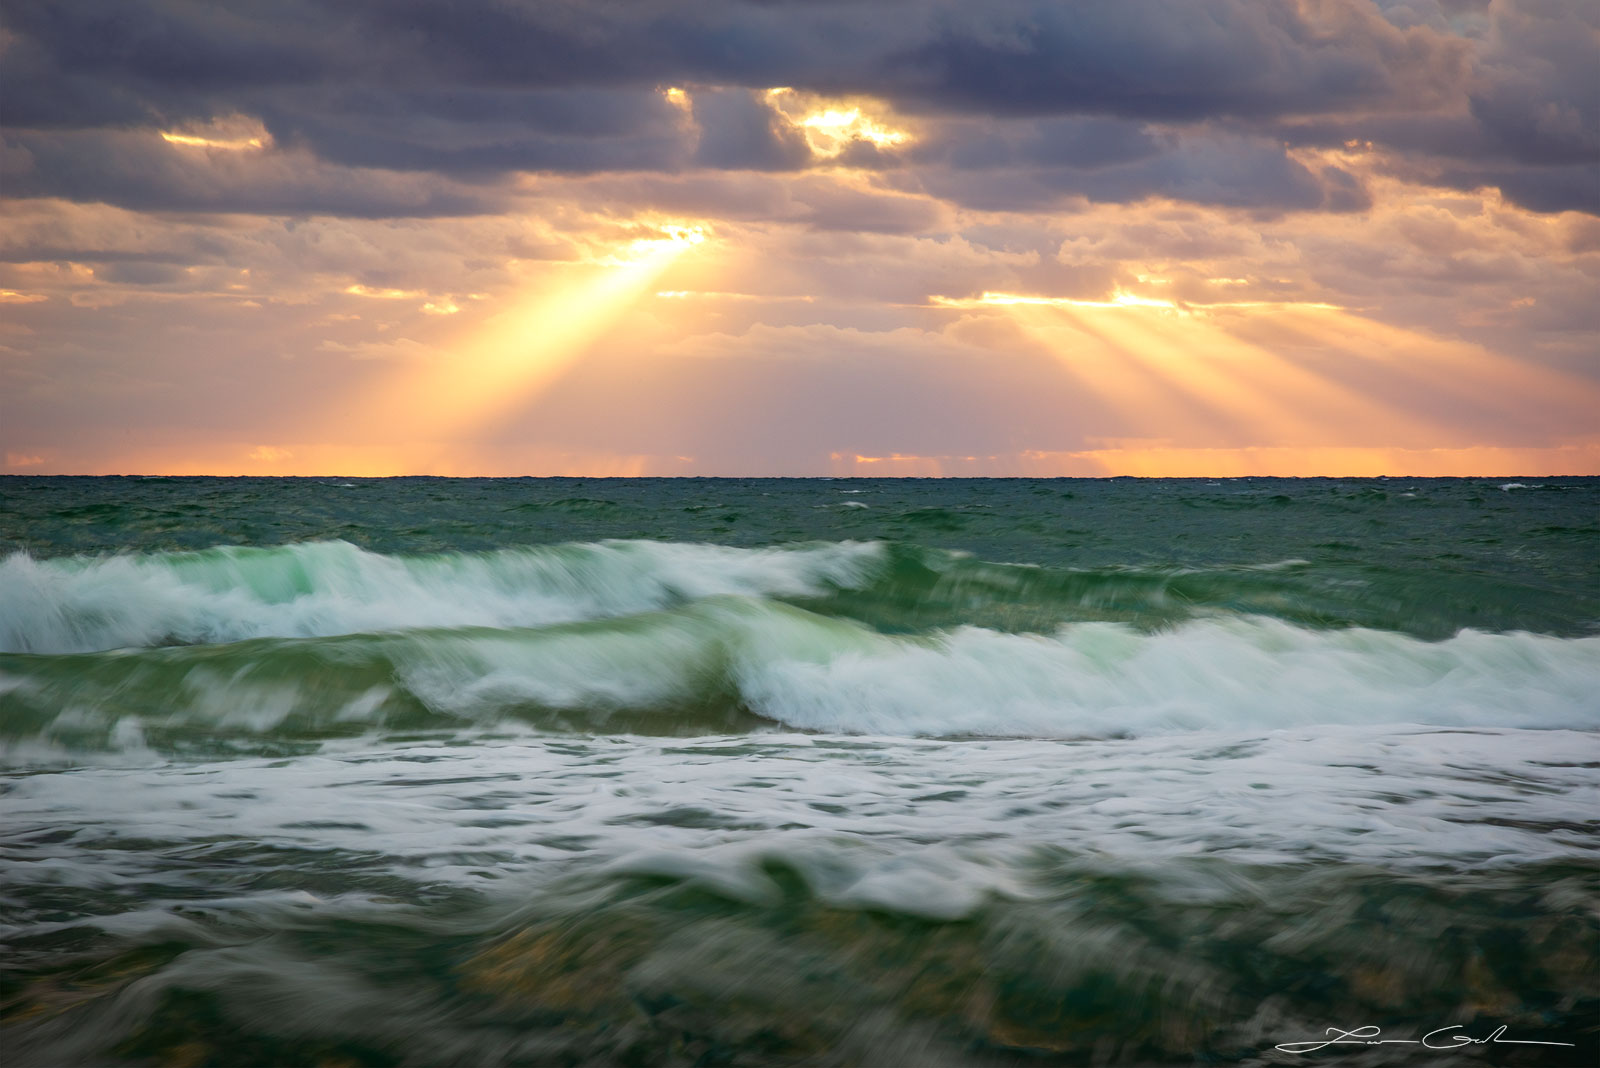 A wavy ocean with white foaming waves and dramatic sun rays peeking down through the clouds - Gintchin Fine Art